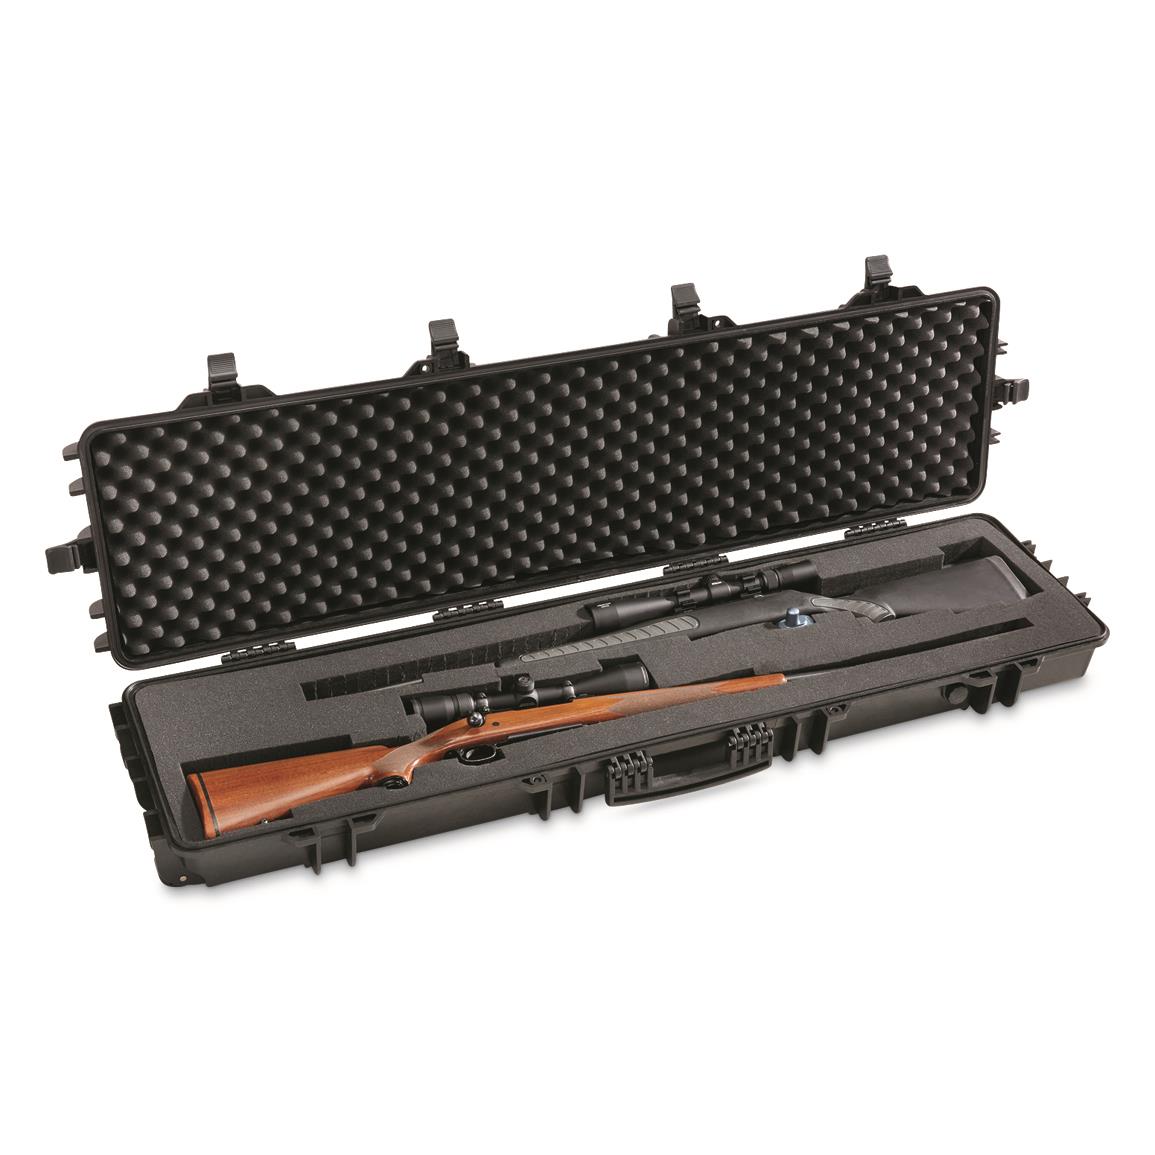 HQ ISSUE Large Double Carry Gun Case with Wheels